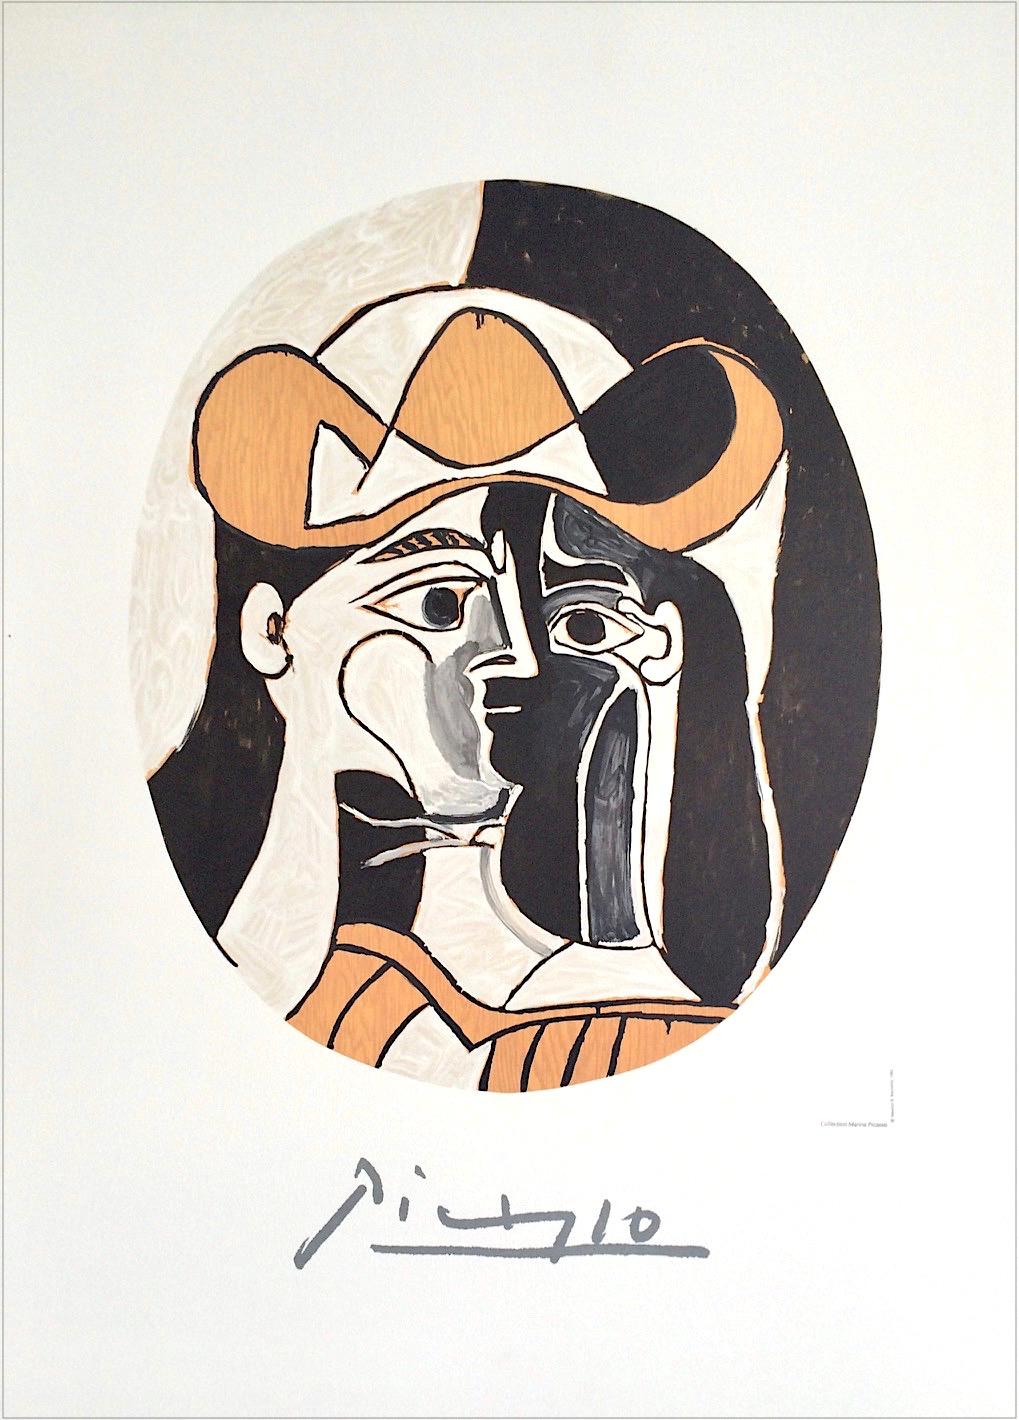 (after) Pablo Picasso Abstract Print - FEMME AU CHAPEAU Lithograph, Abstract Oval Portrait, Woman Cowboy Hat Black Eyes